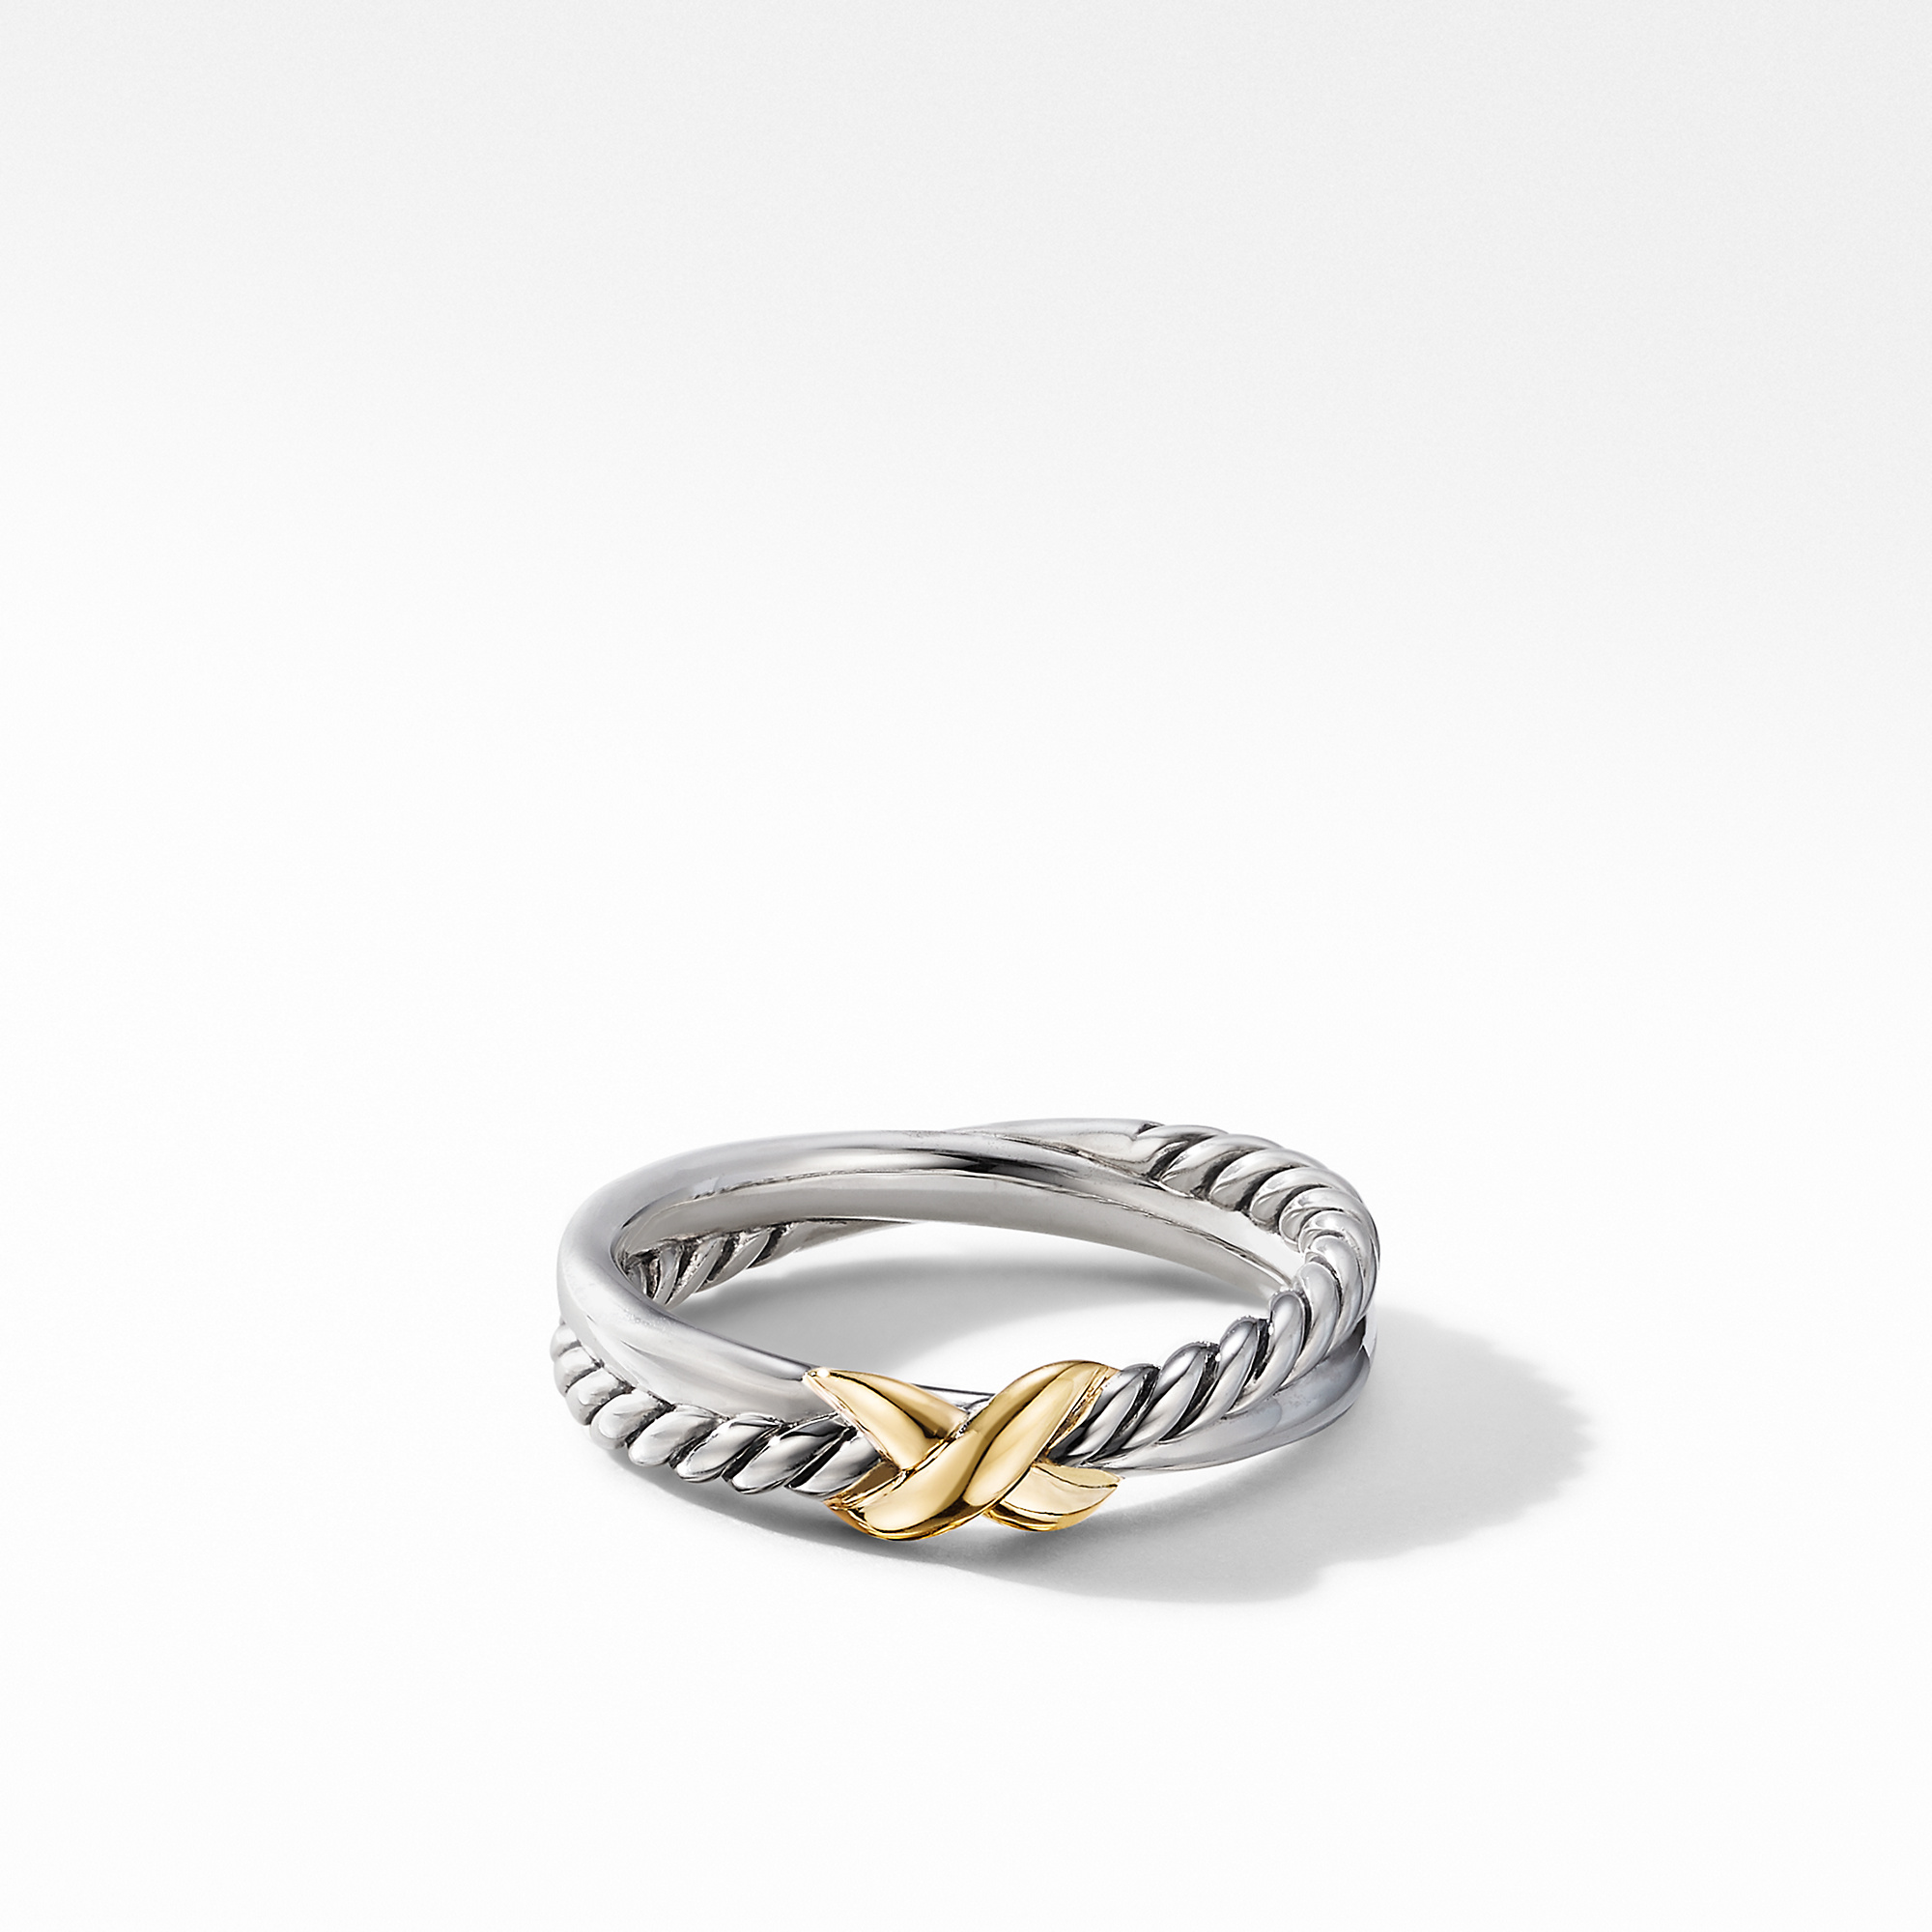 Petite X Ring in Sterling Silver with 18K Yellow Gold